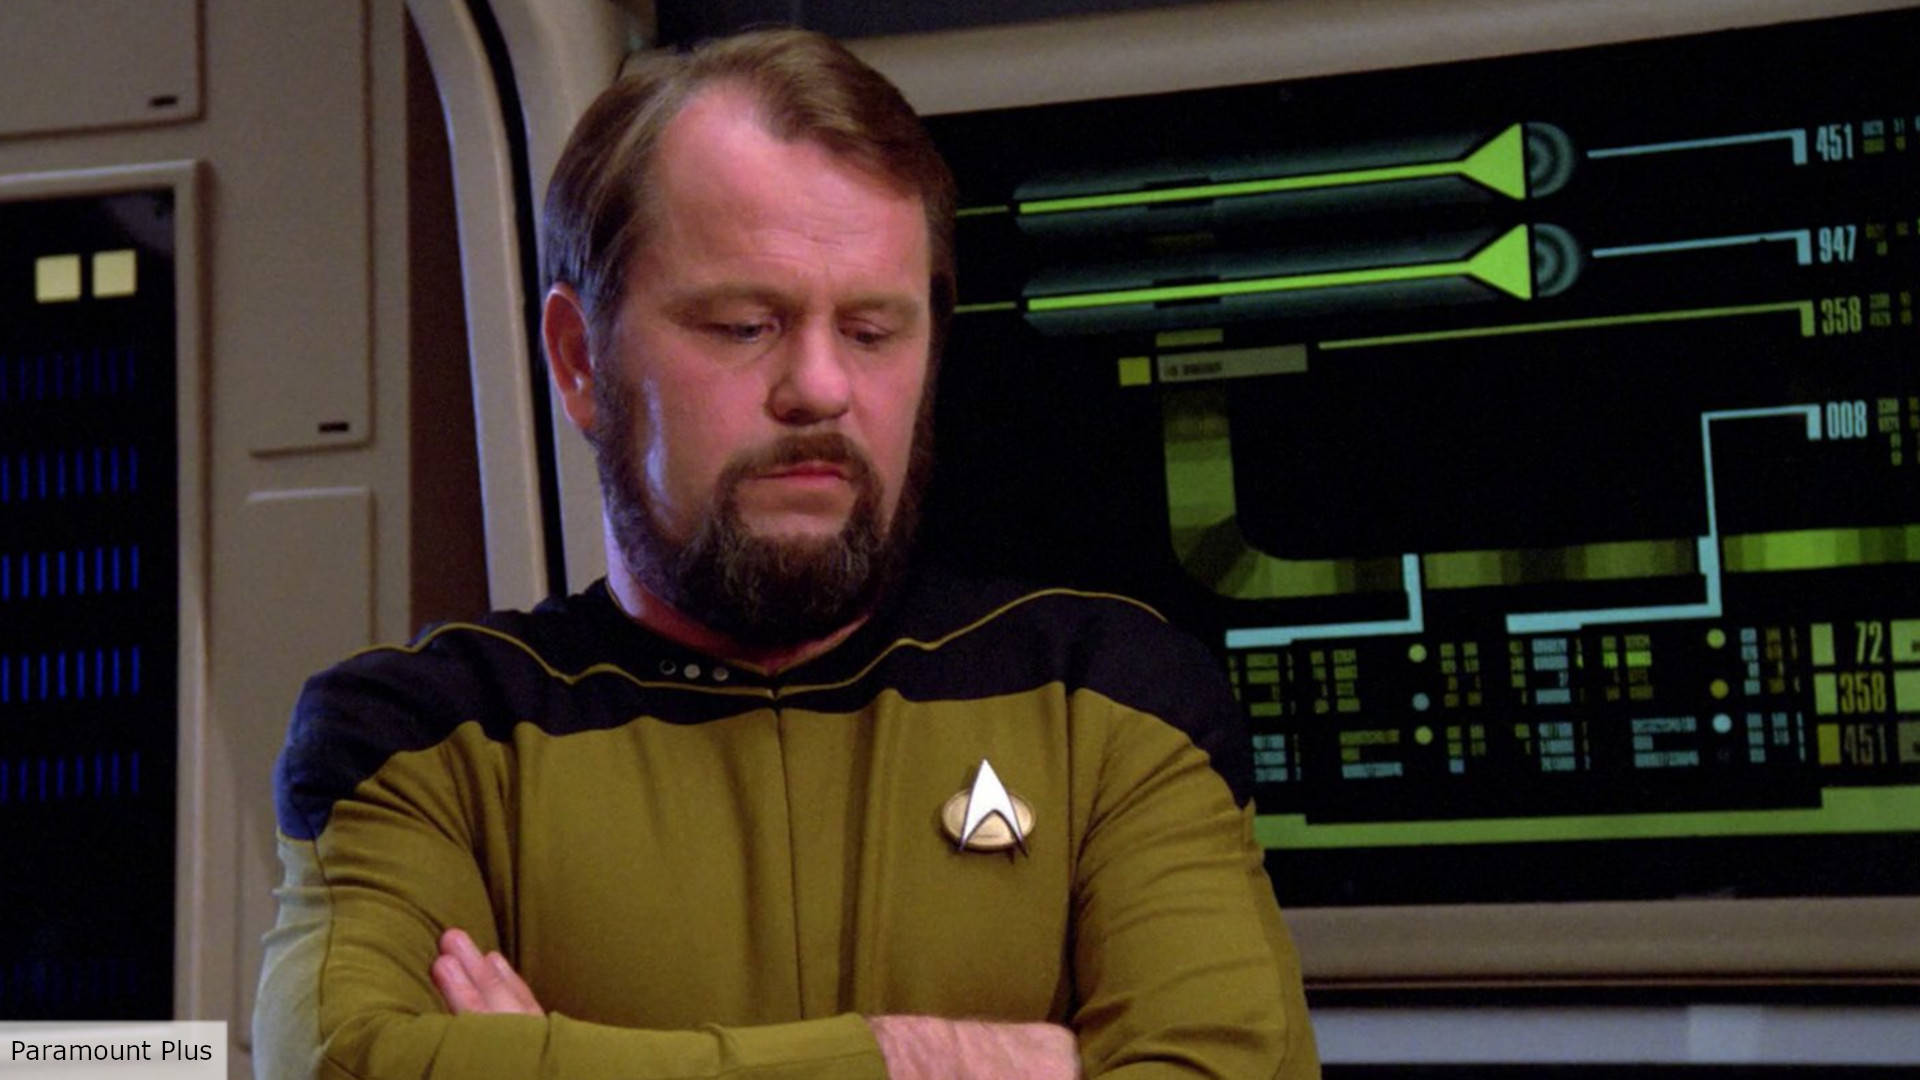 Star Trek fans are fixing TNG’s most annoying mystery after 36 years